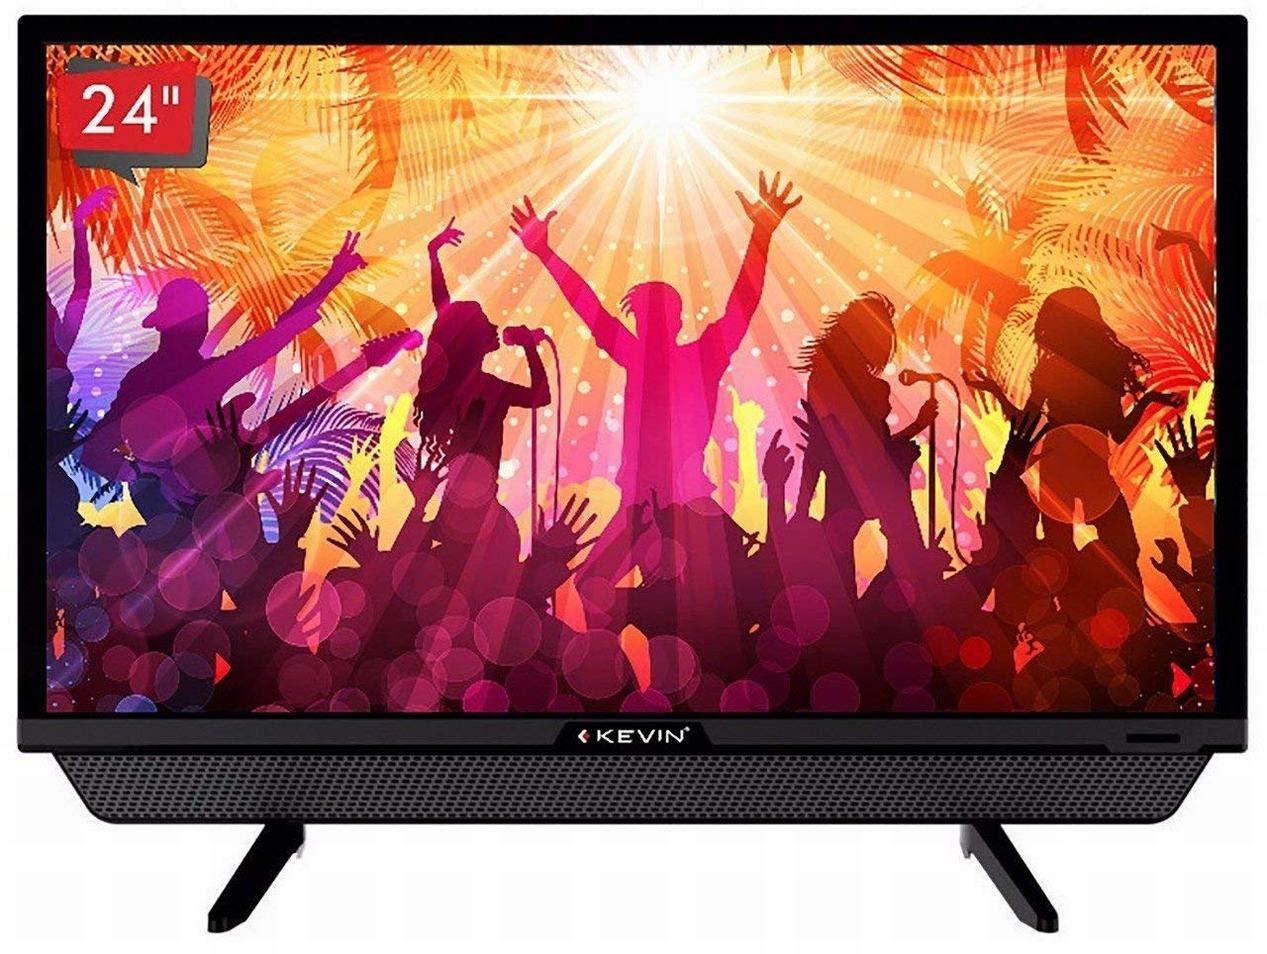 Kevin 24 inches HD Ready LED TV KN24832 (Black) (2018 Model)